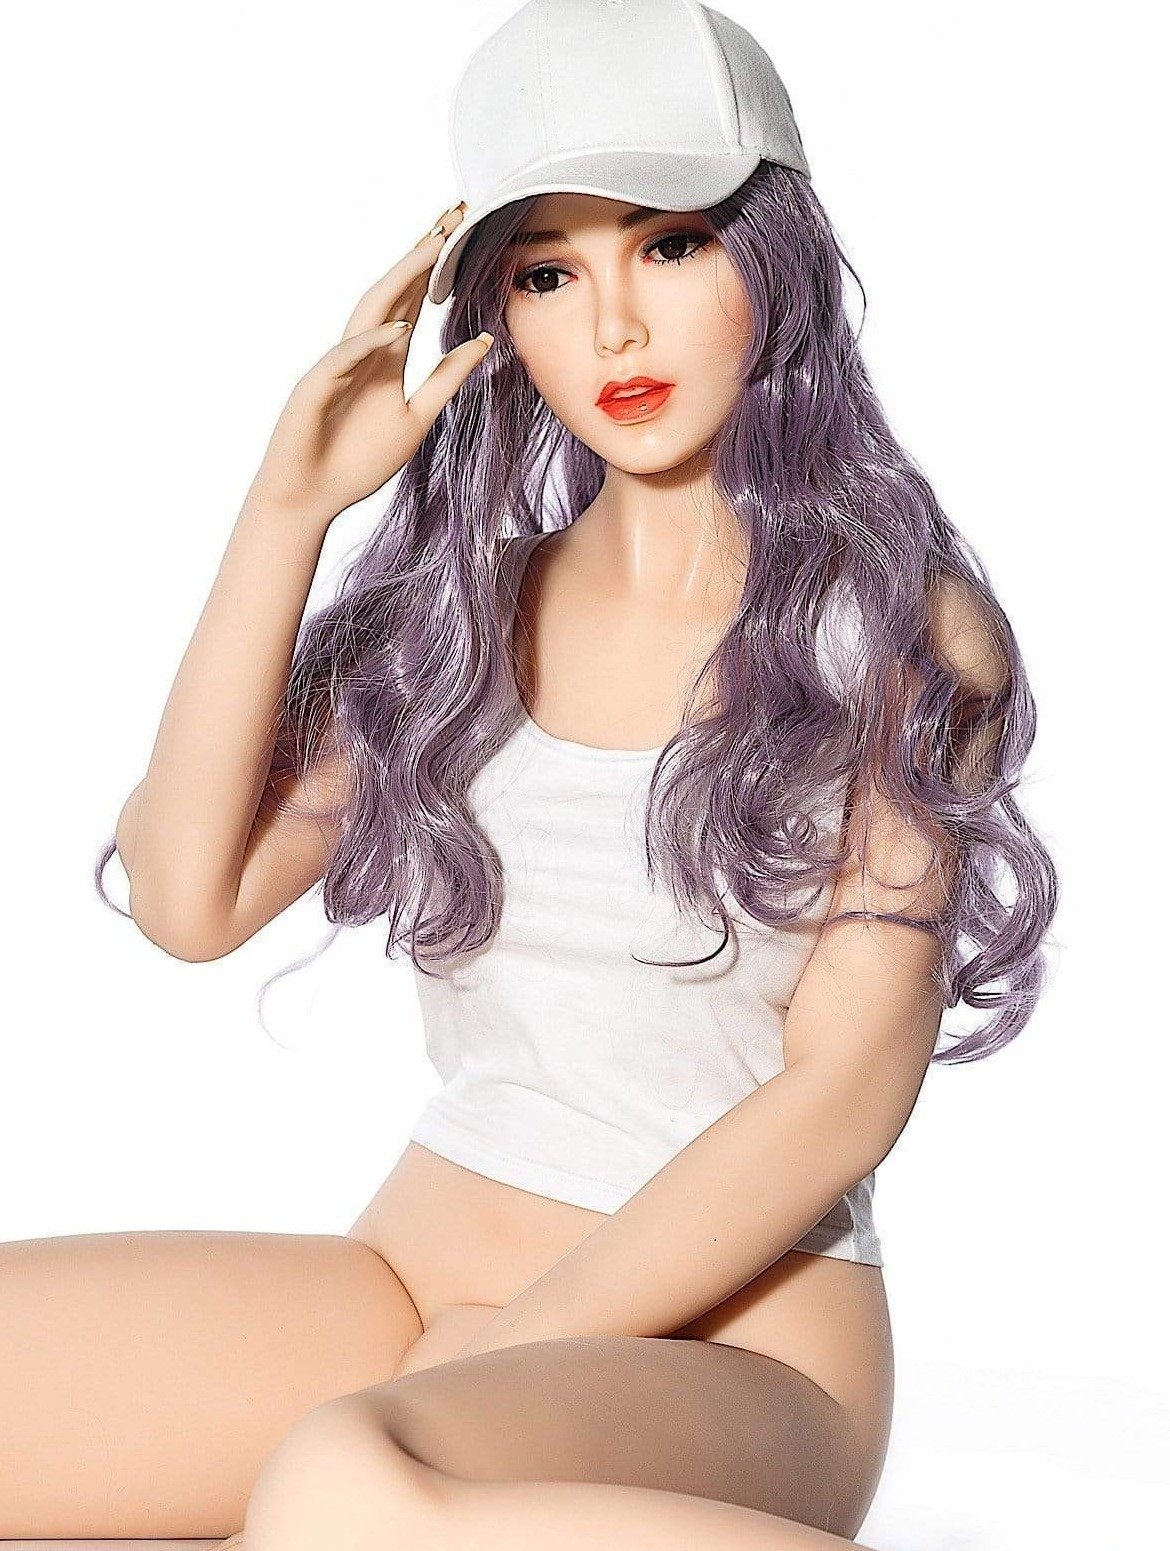 Aibei Doll |165cm Athletic Realistic Sex Doll- Xiang - tpesexdoll.com